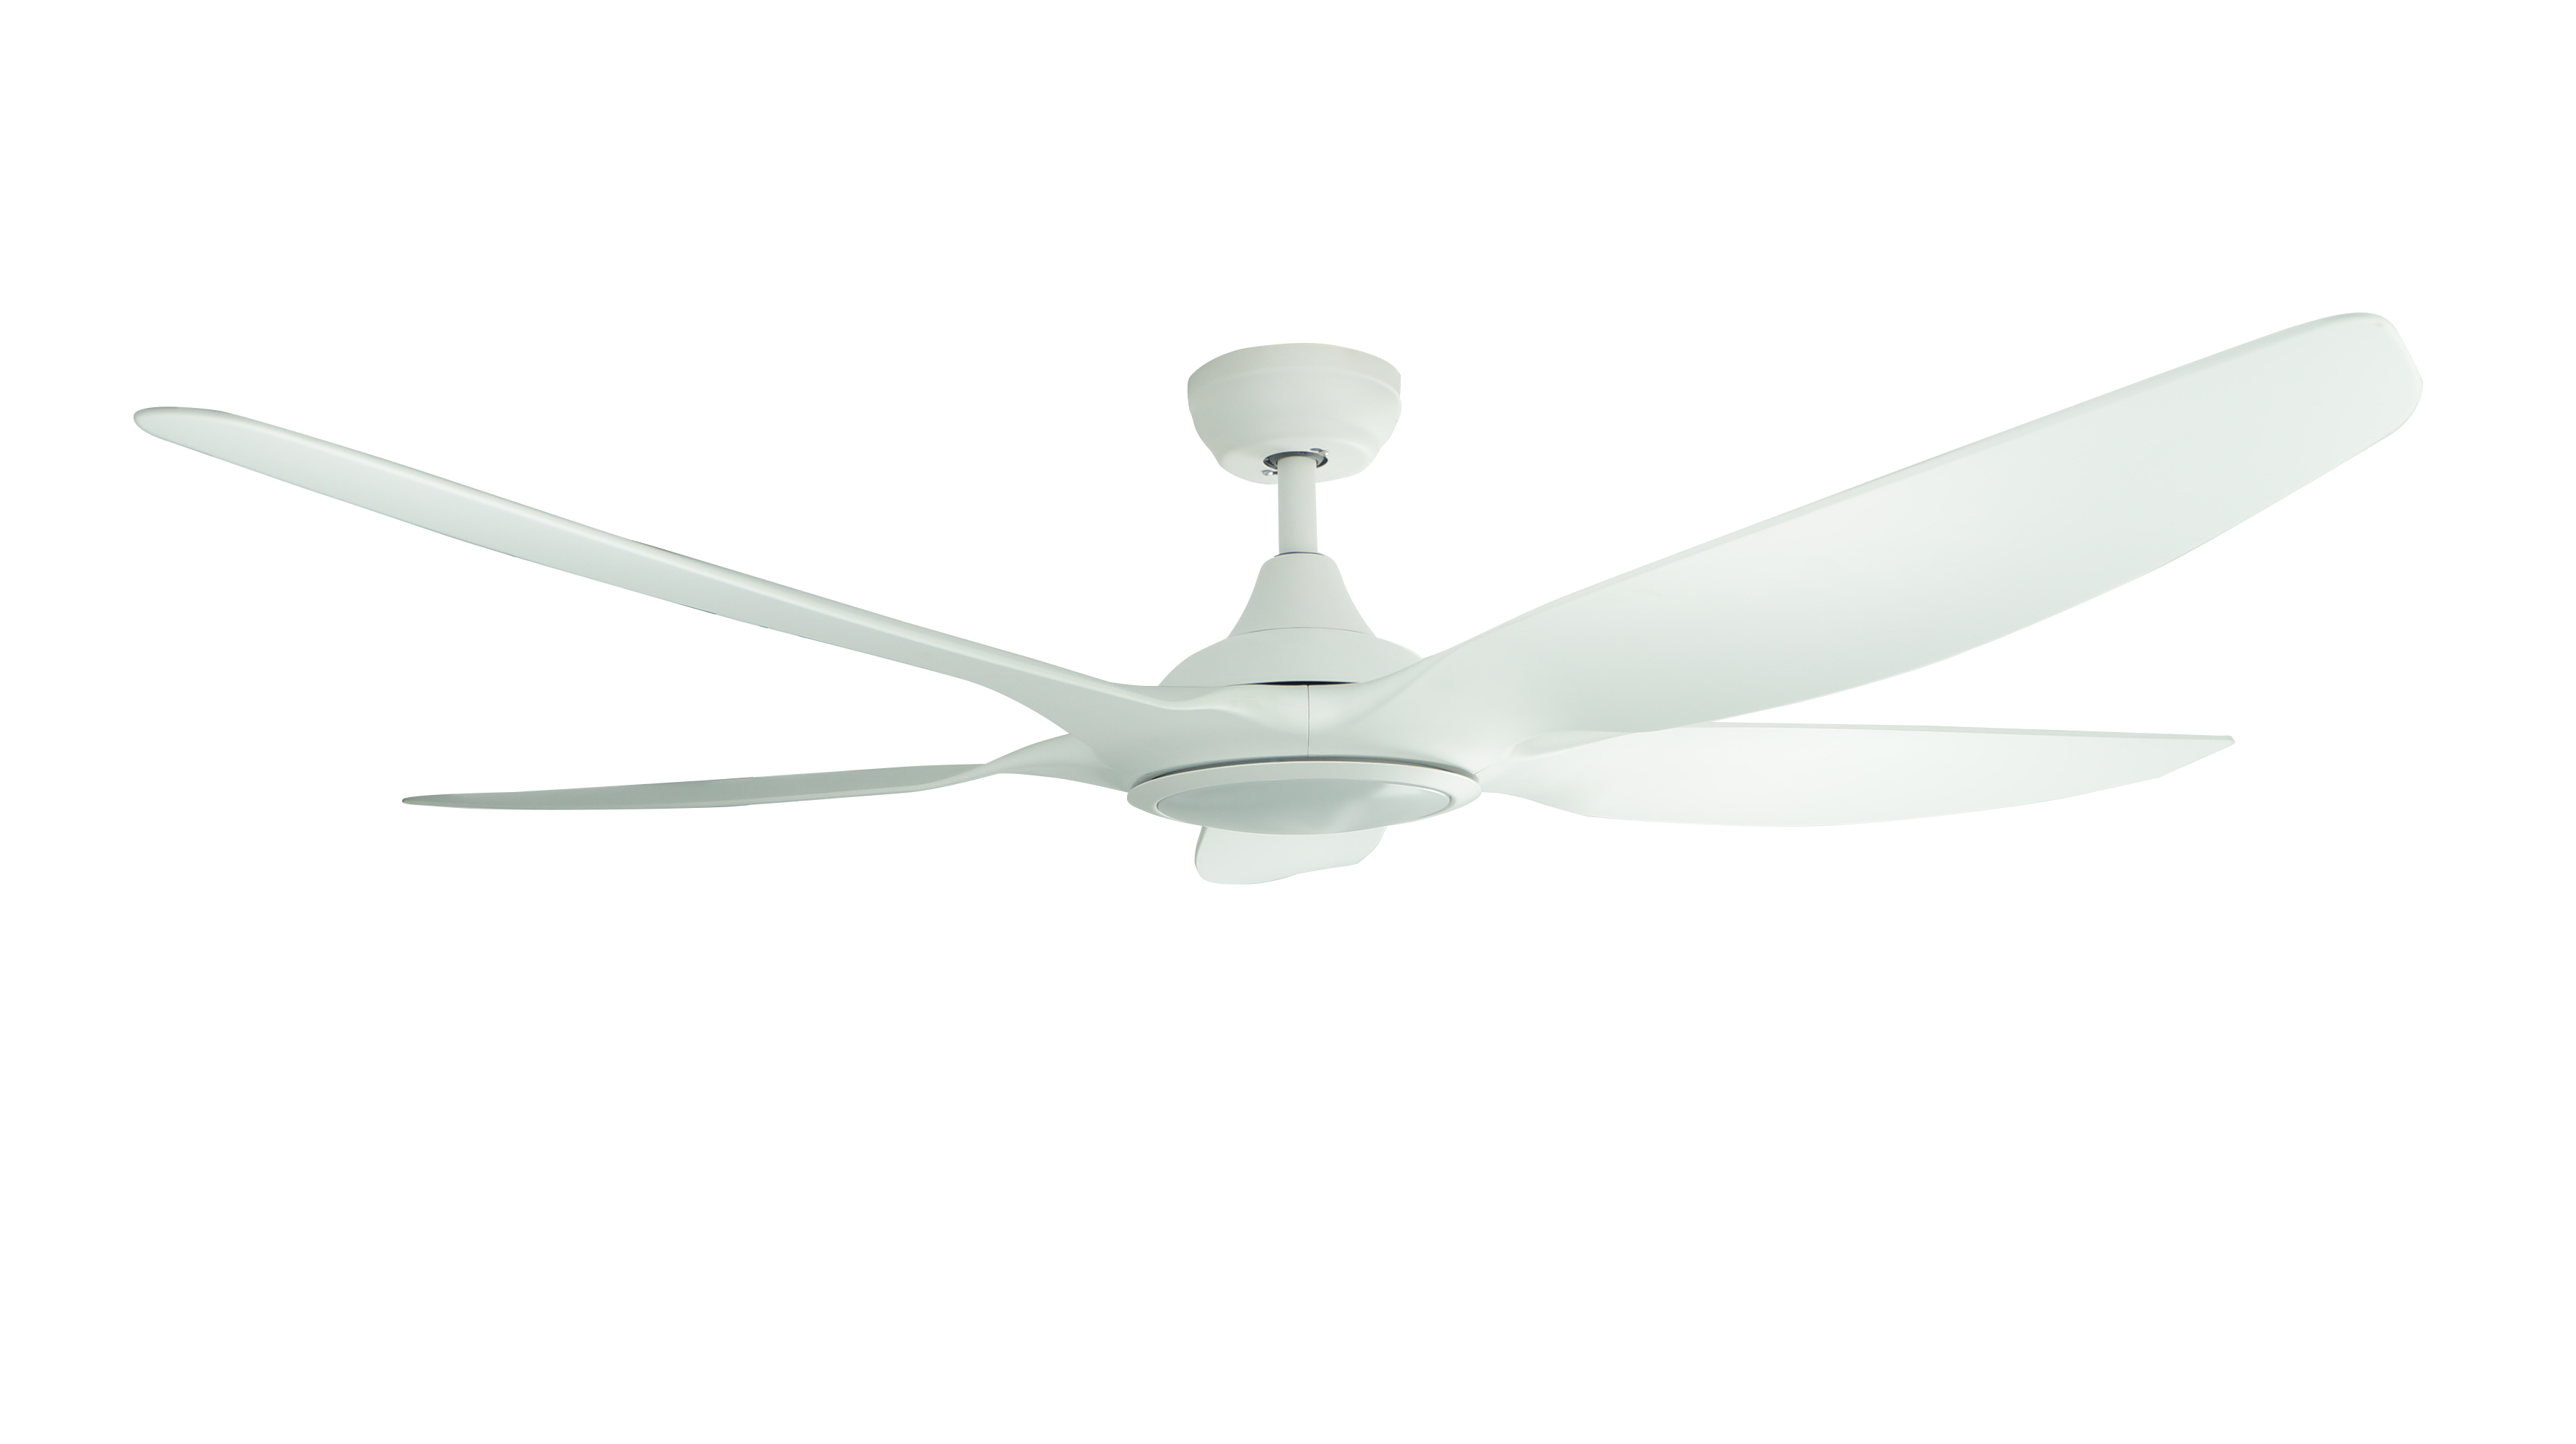 Airbena Ceiling Fan 48 "ABS Fan Blade with And without Light for Household Ceiling Fans